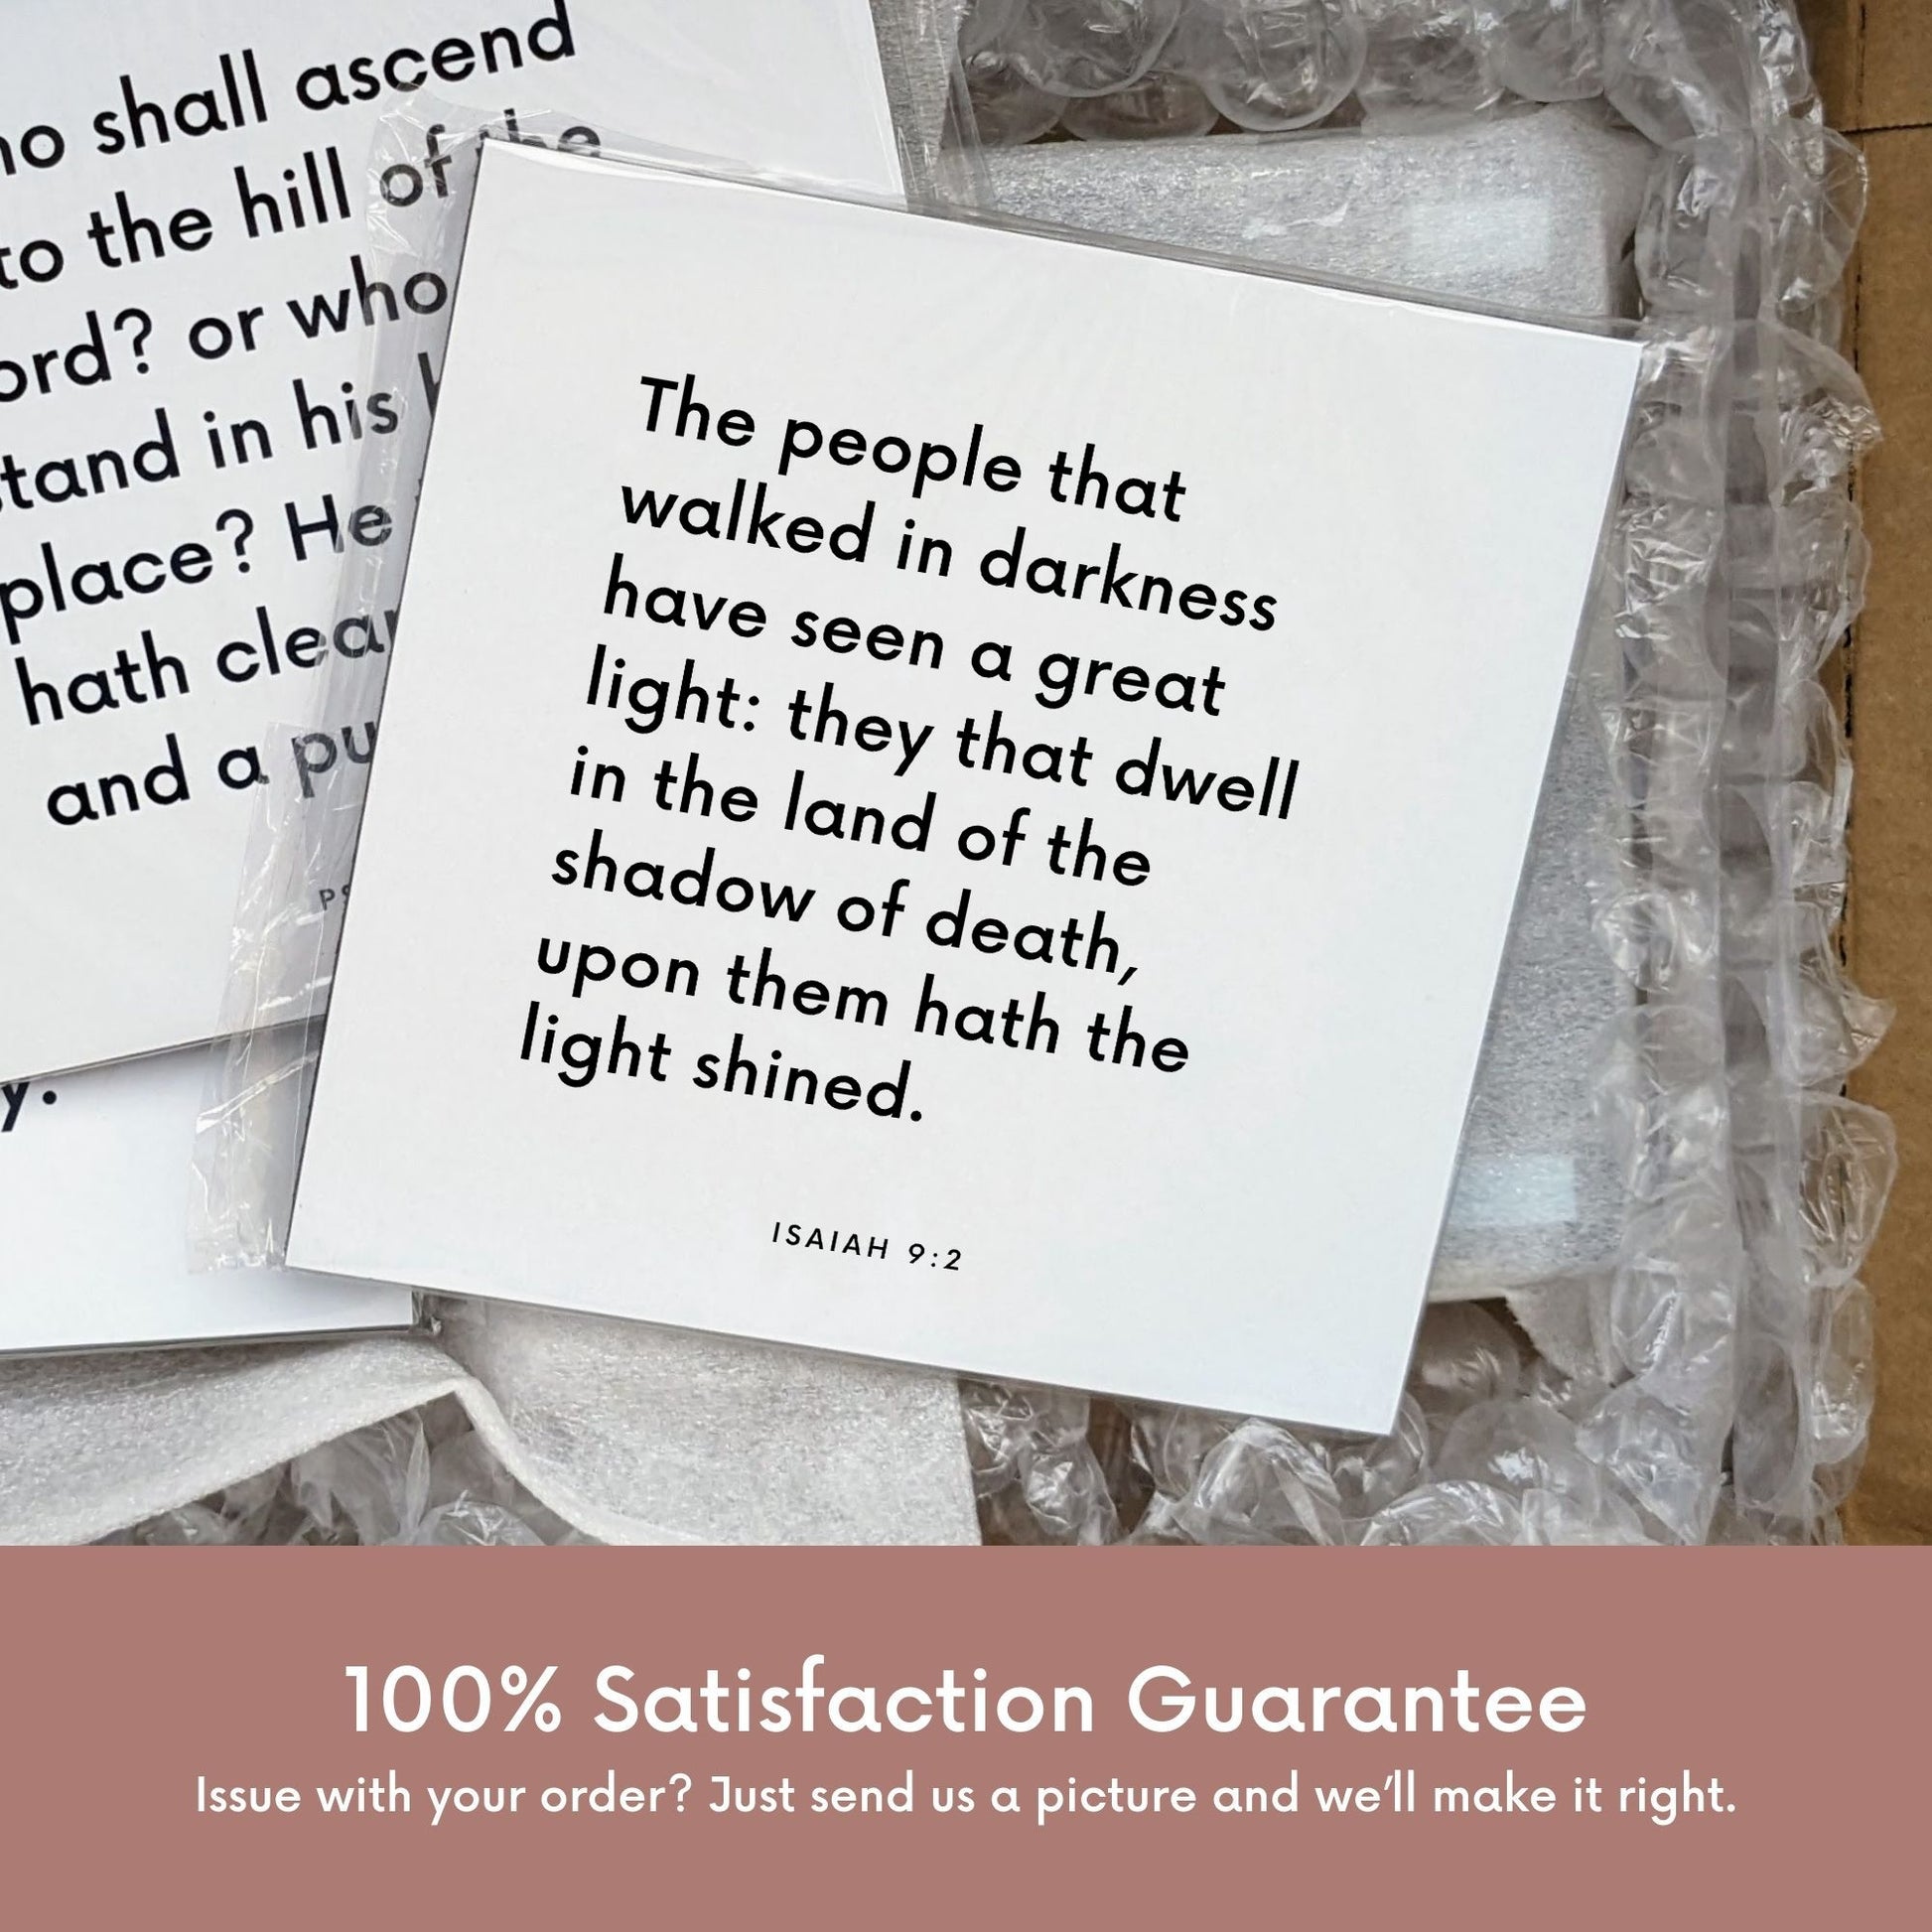 Shipping materials for scripture tile of Isaiah 9:2 - "The people that walked in darkness have seen a great light"